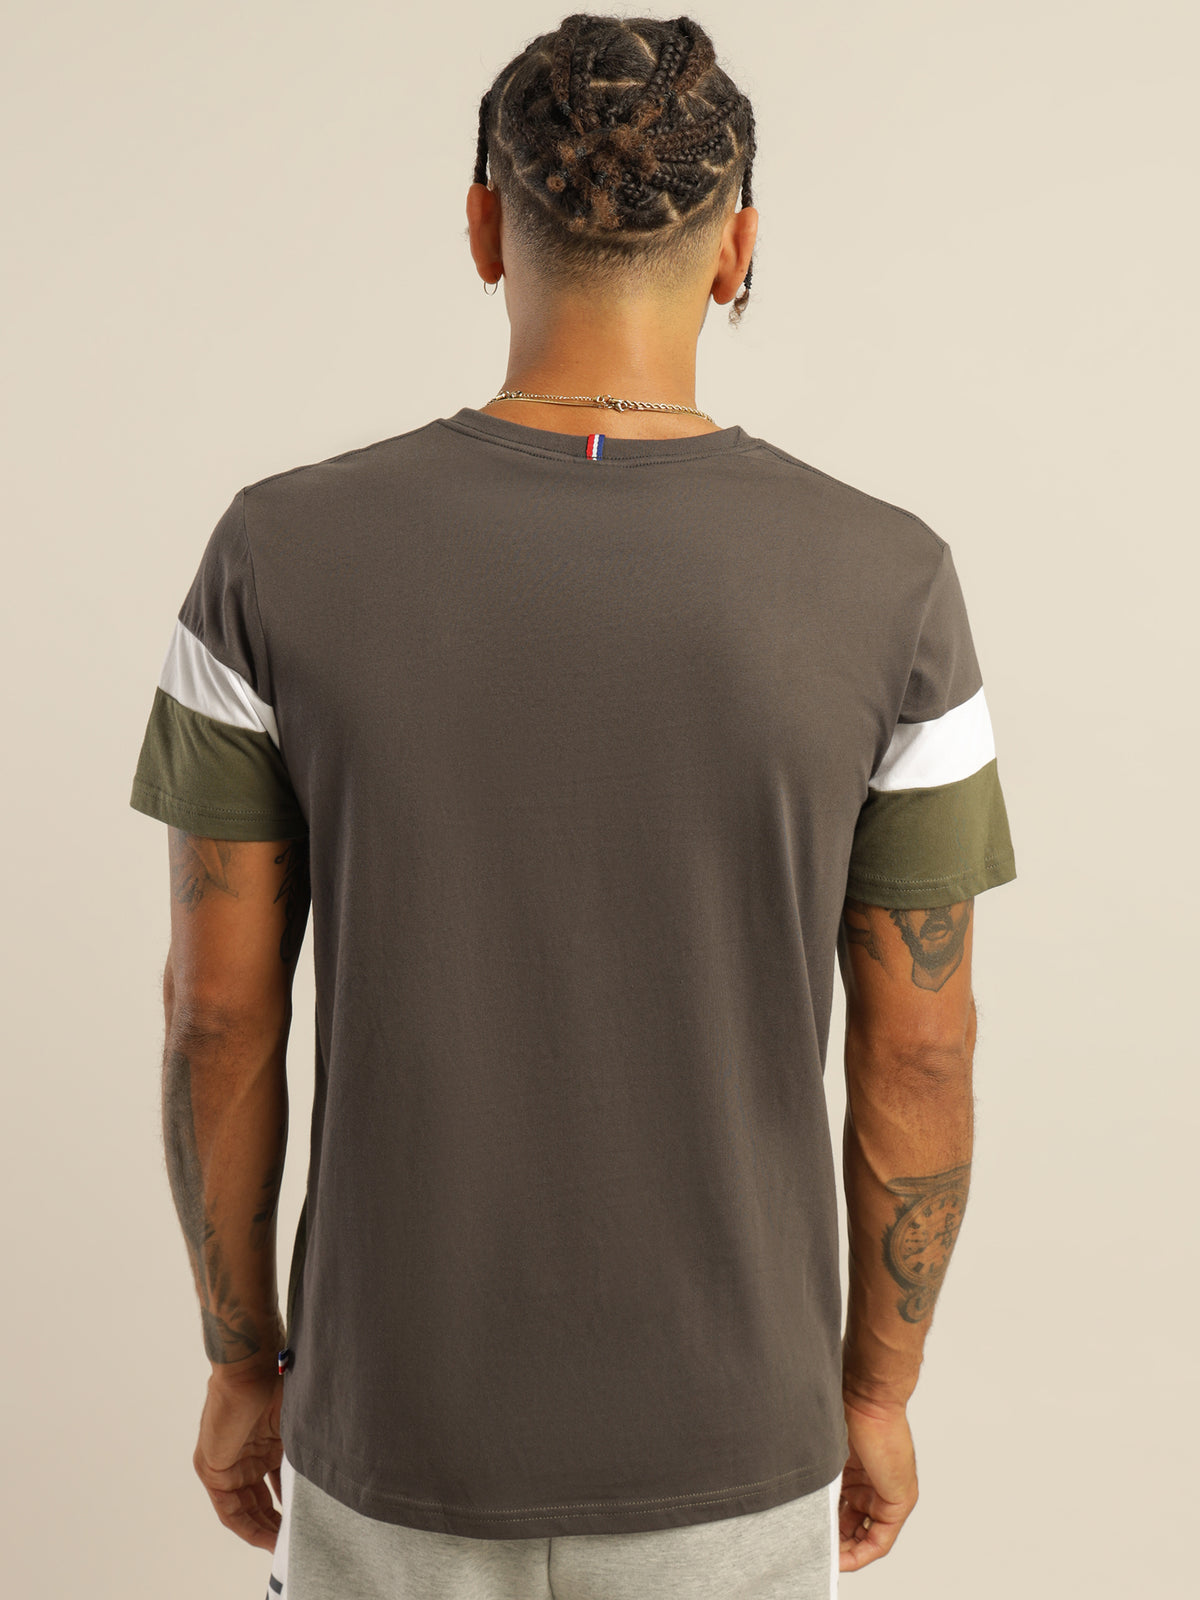 Tricolore Logo T-Shirt in Carbon